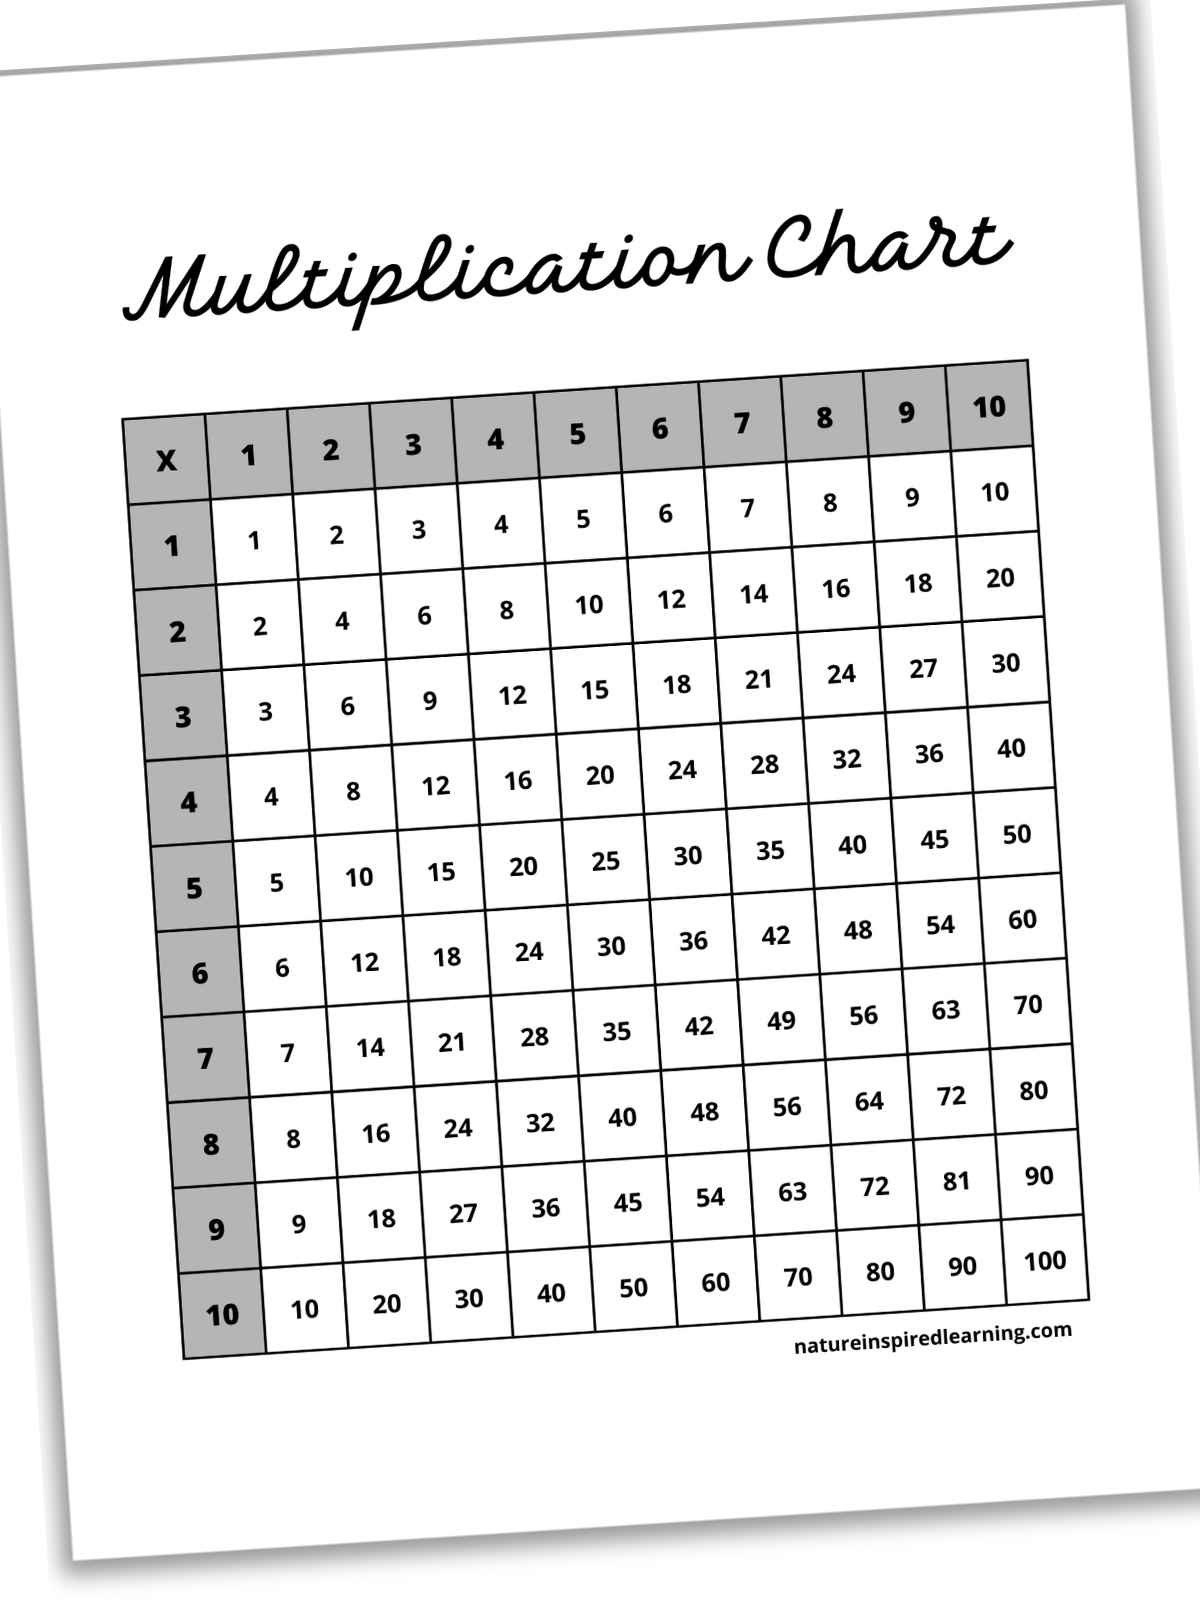 10 by 10 multiplication chart with white boxes in the center and gray boxes going down the left side and across the top. Title written in cursive across the top. Printable slanted with a drop shadow.